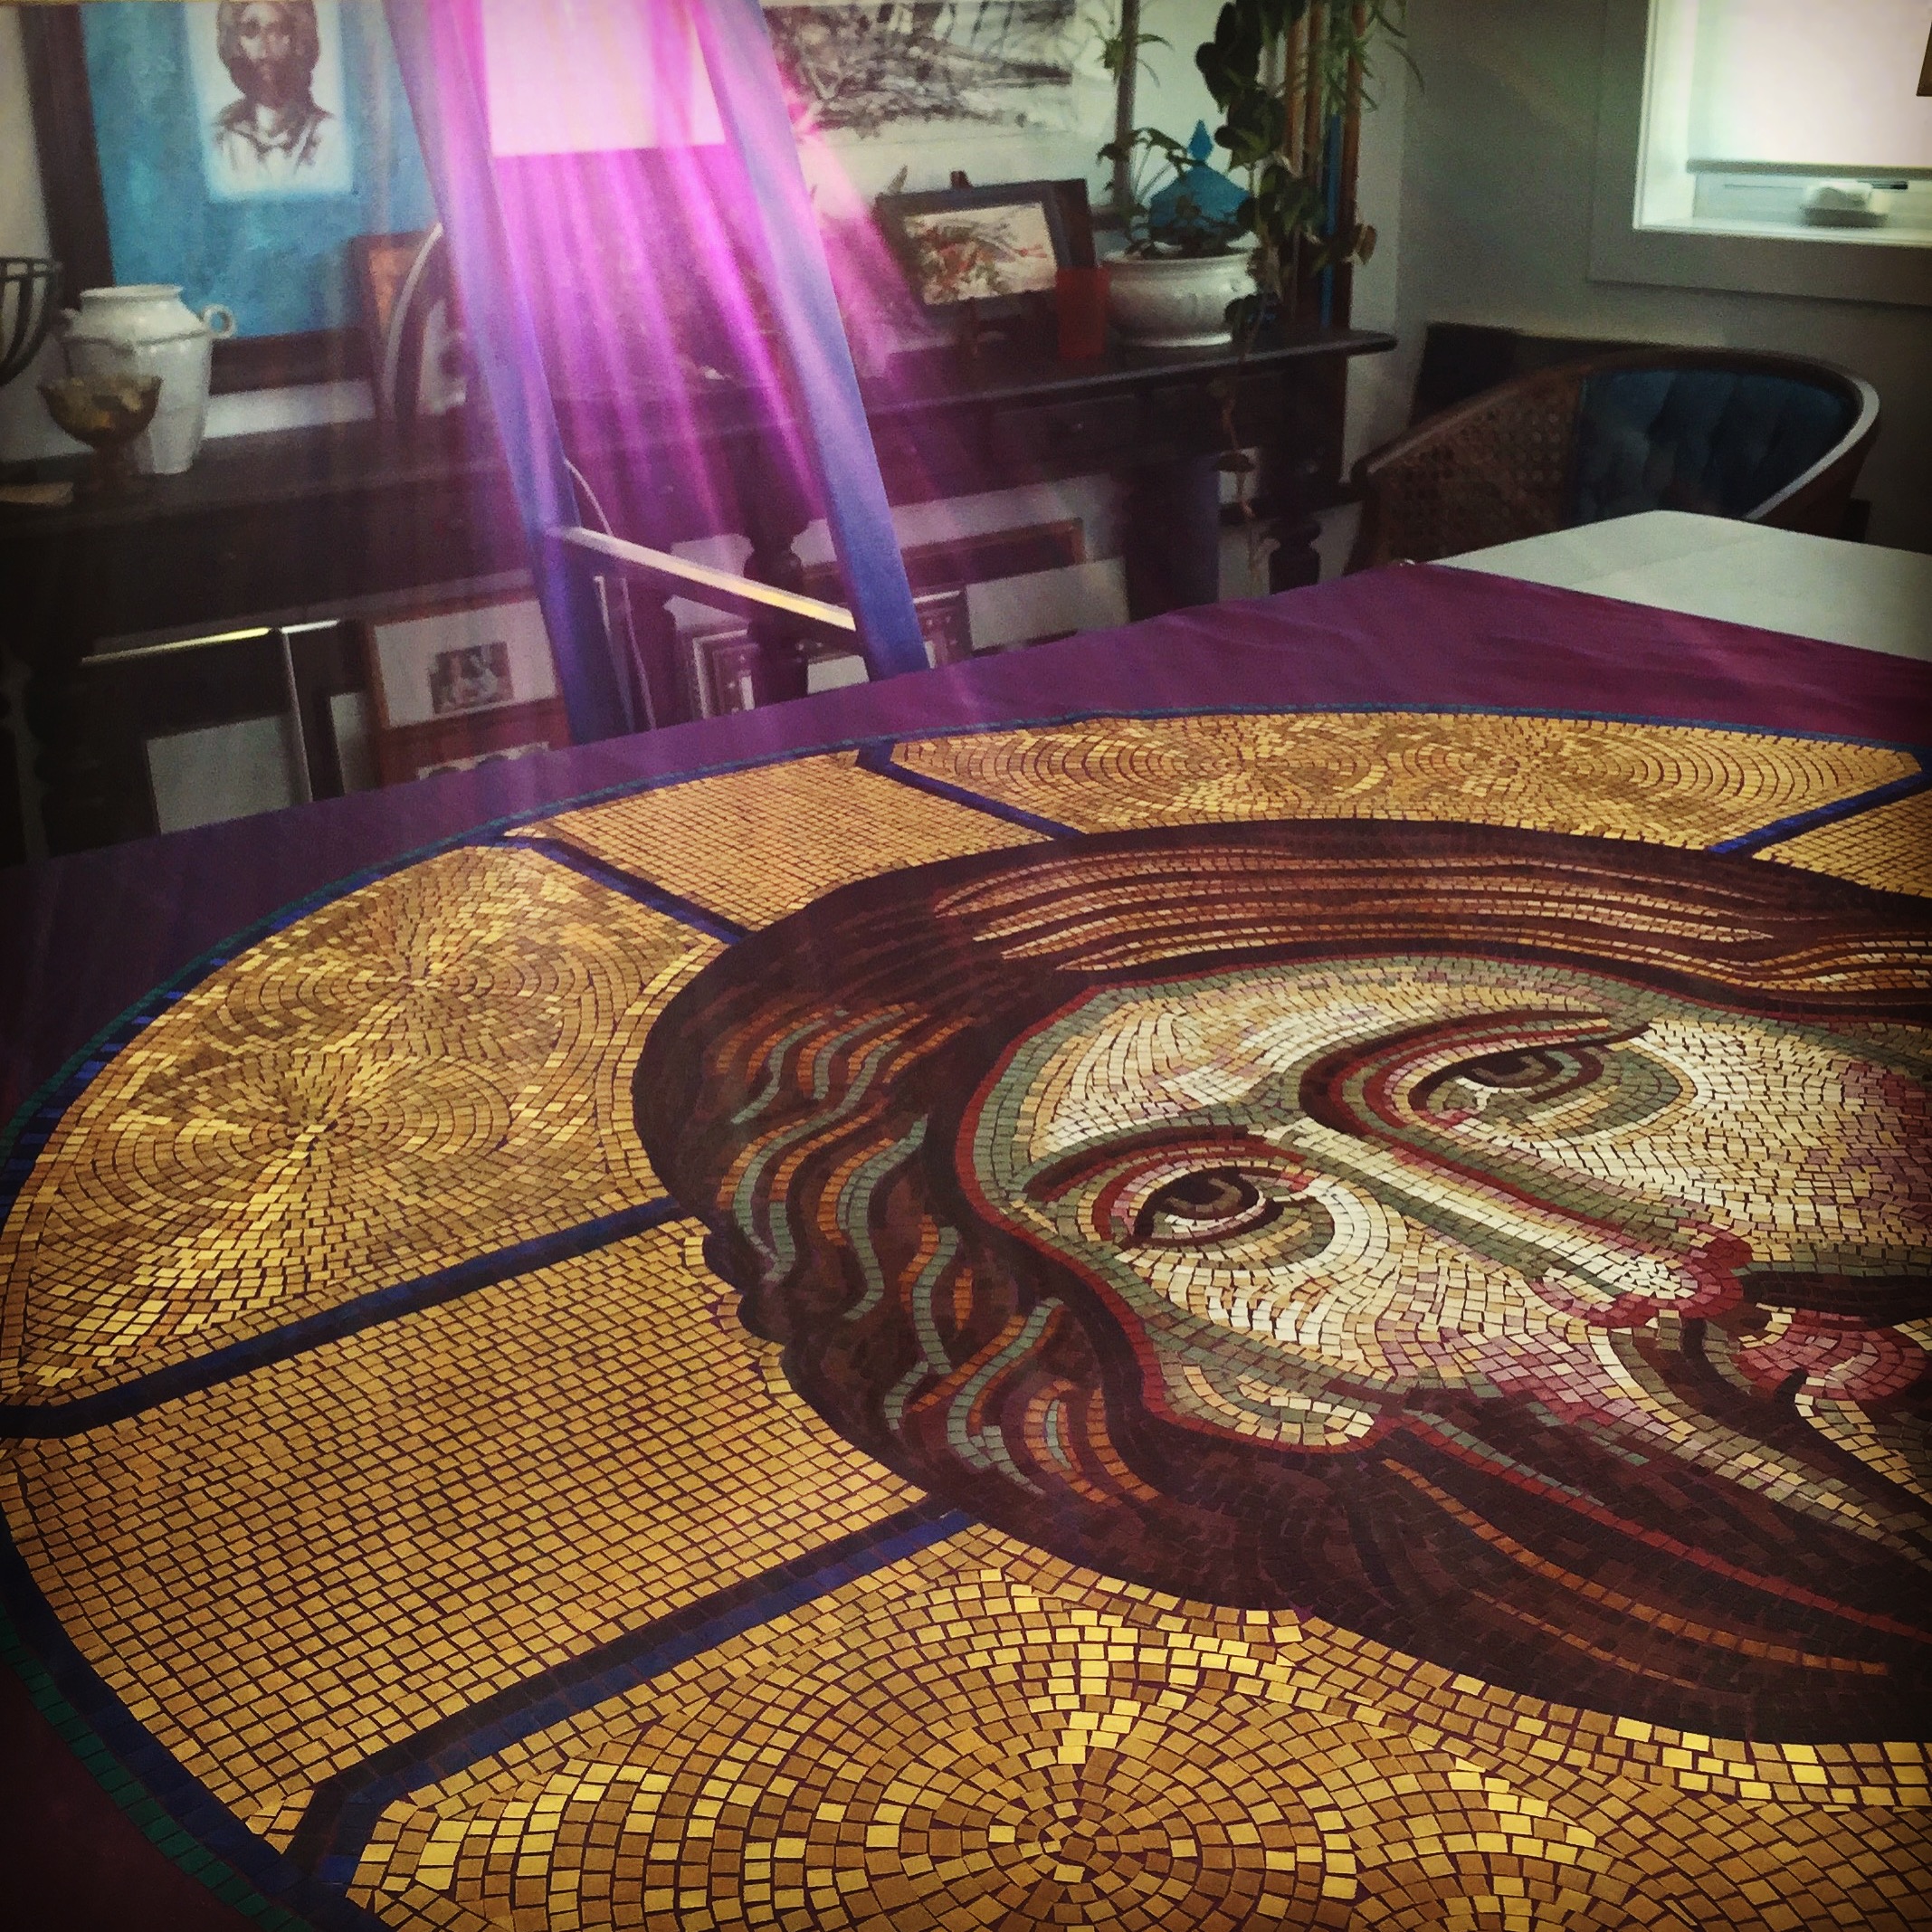 Light falling on Christ Pantocrator mosaic textile work in my studio during a photo shoot (2016), photo by Michelle L Hofer